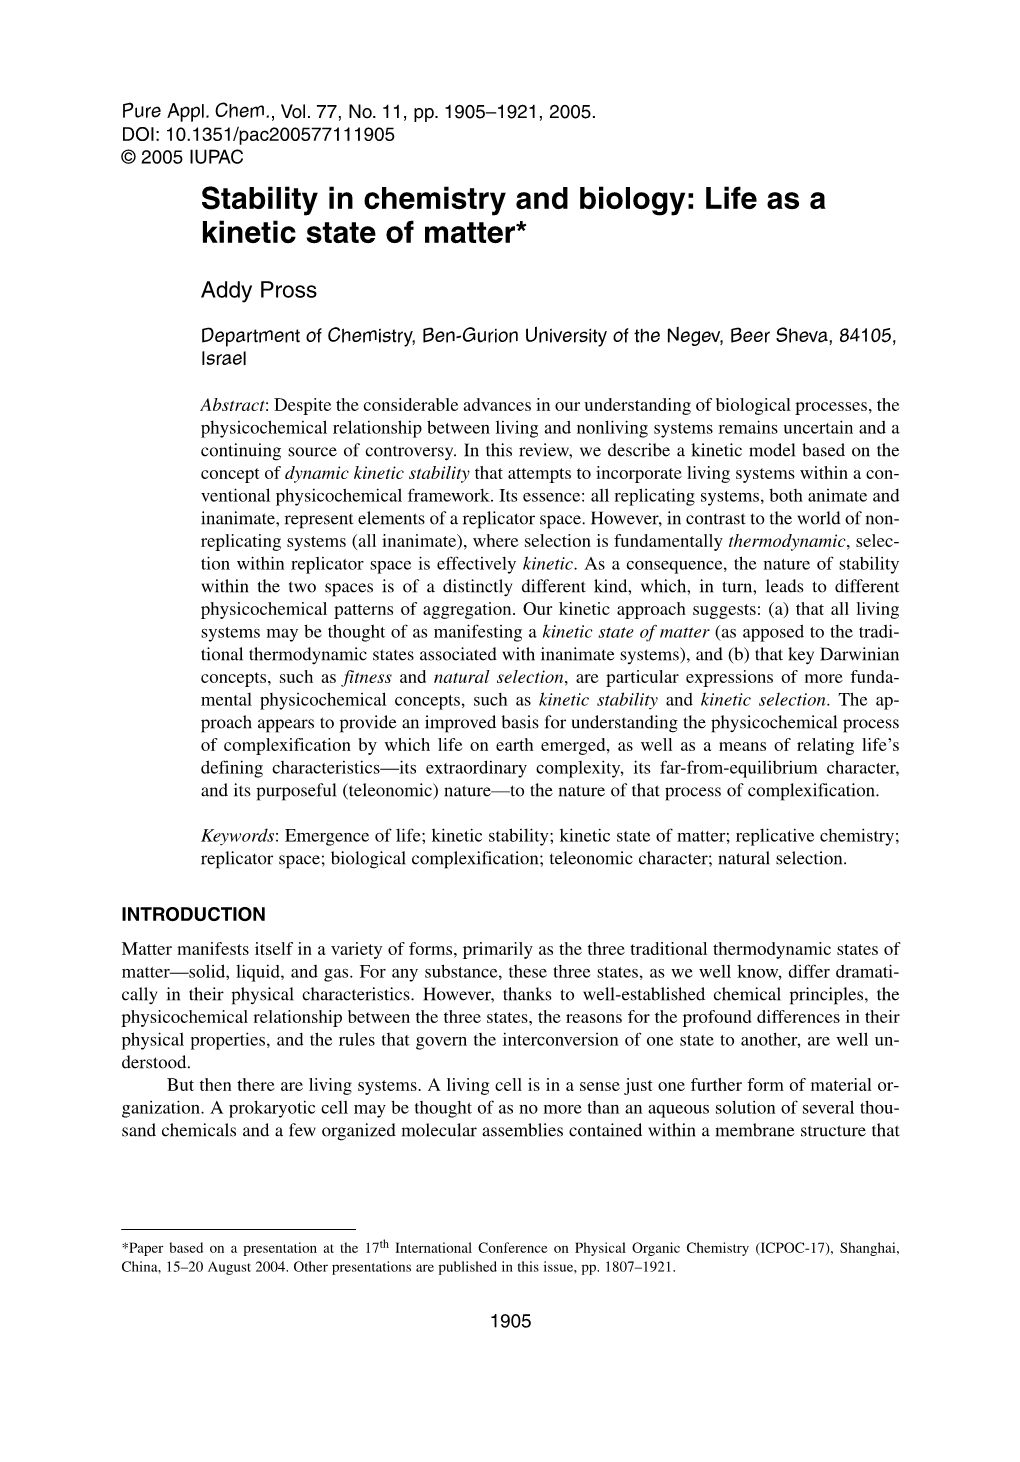 Stability in Chemistry and Biology: Life As a Kinetic State of Matter*